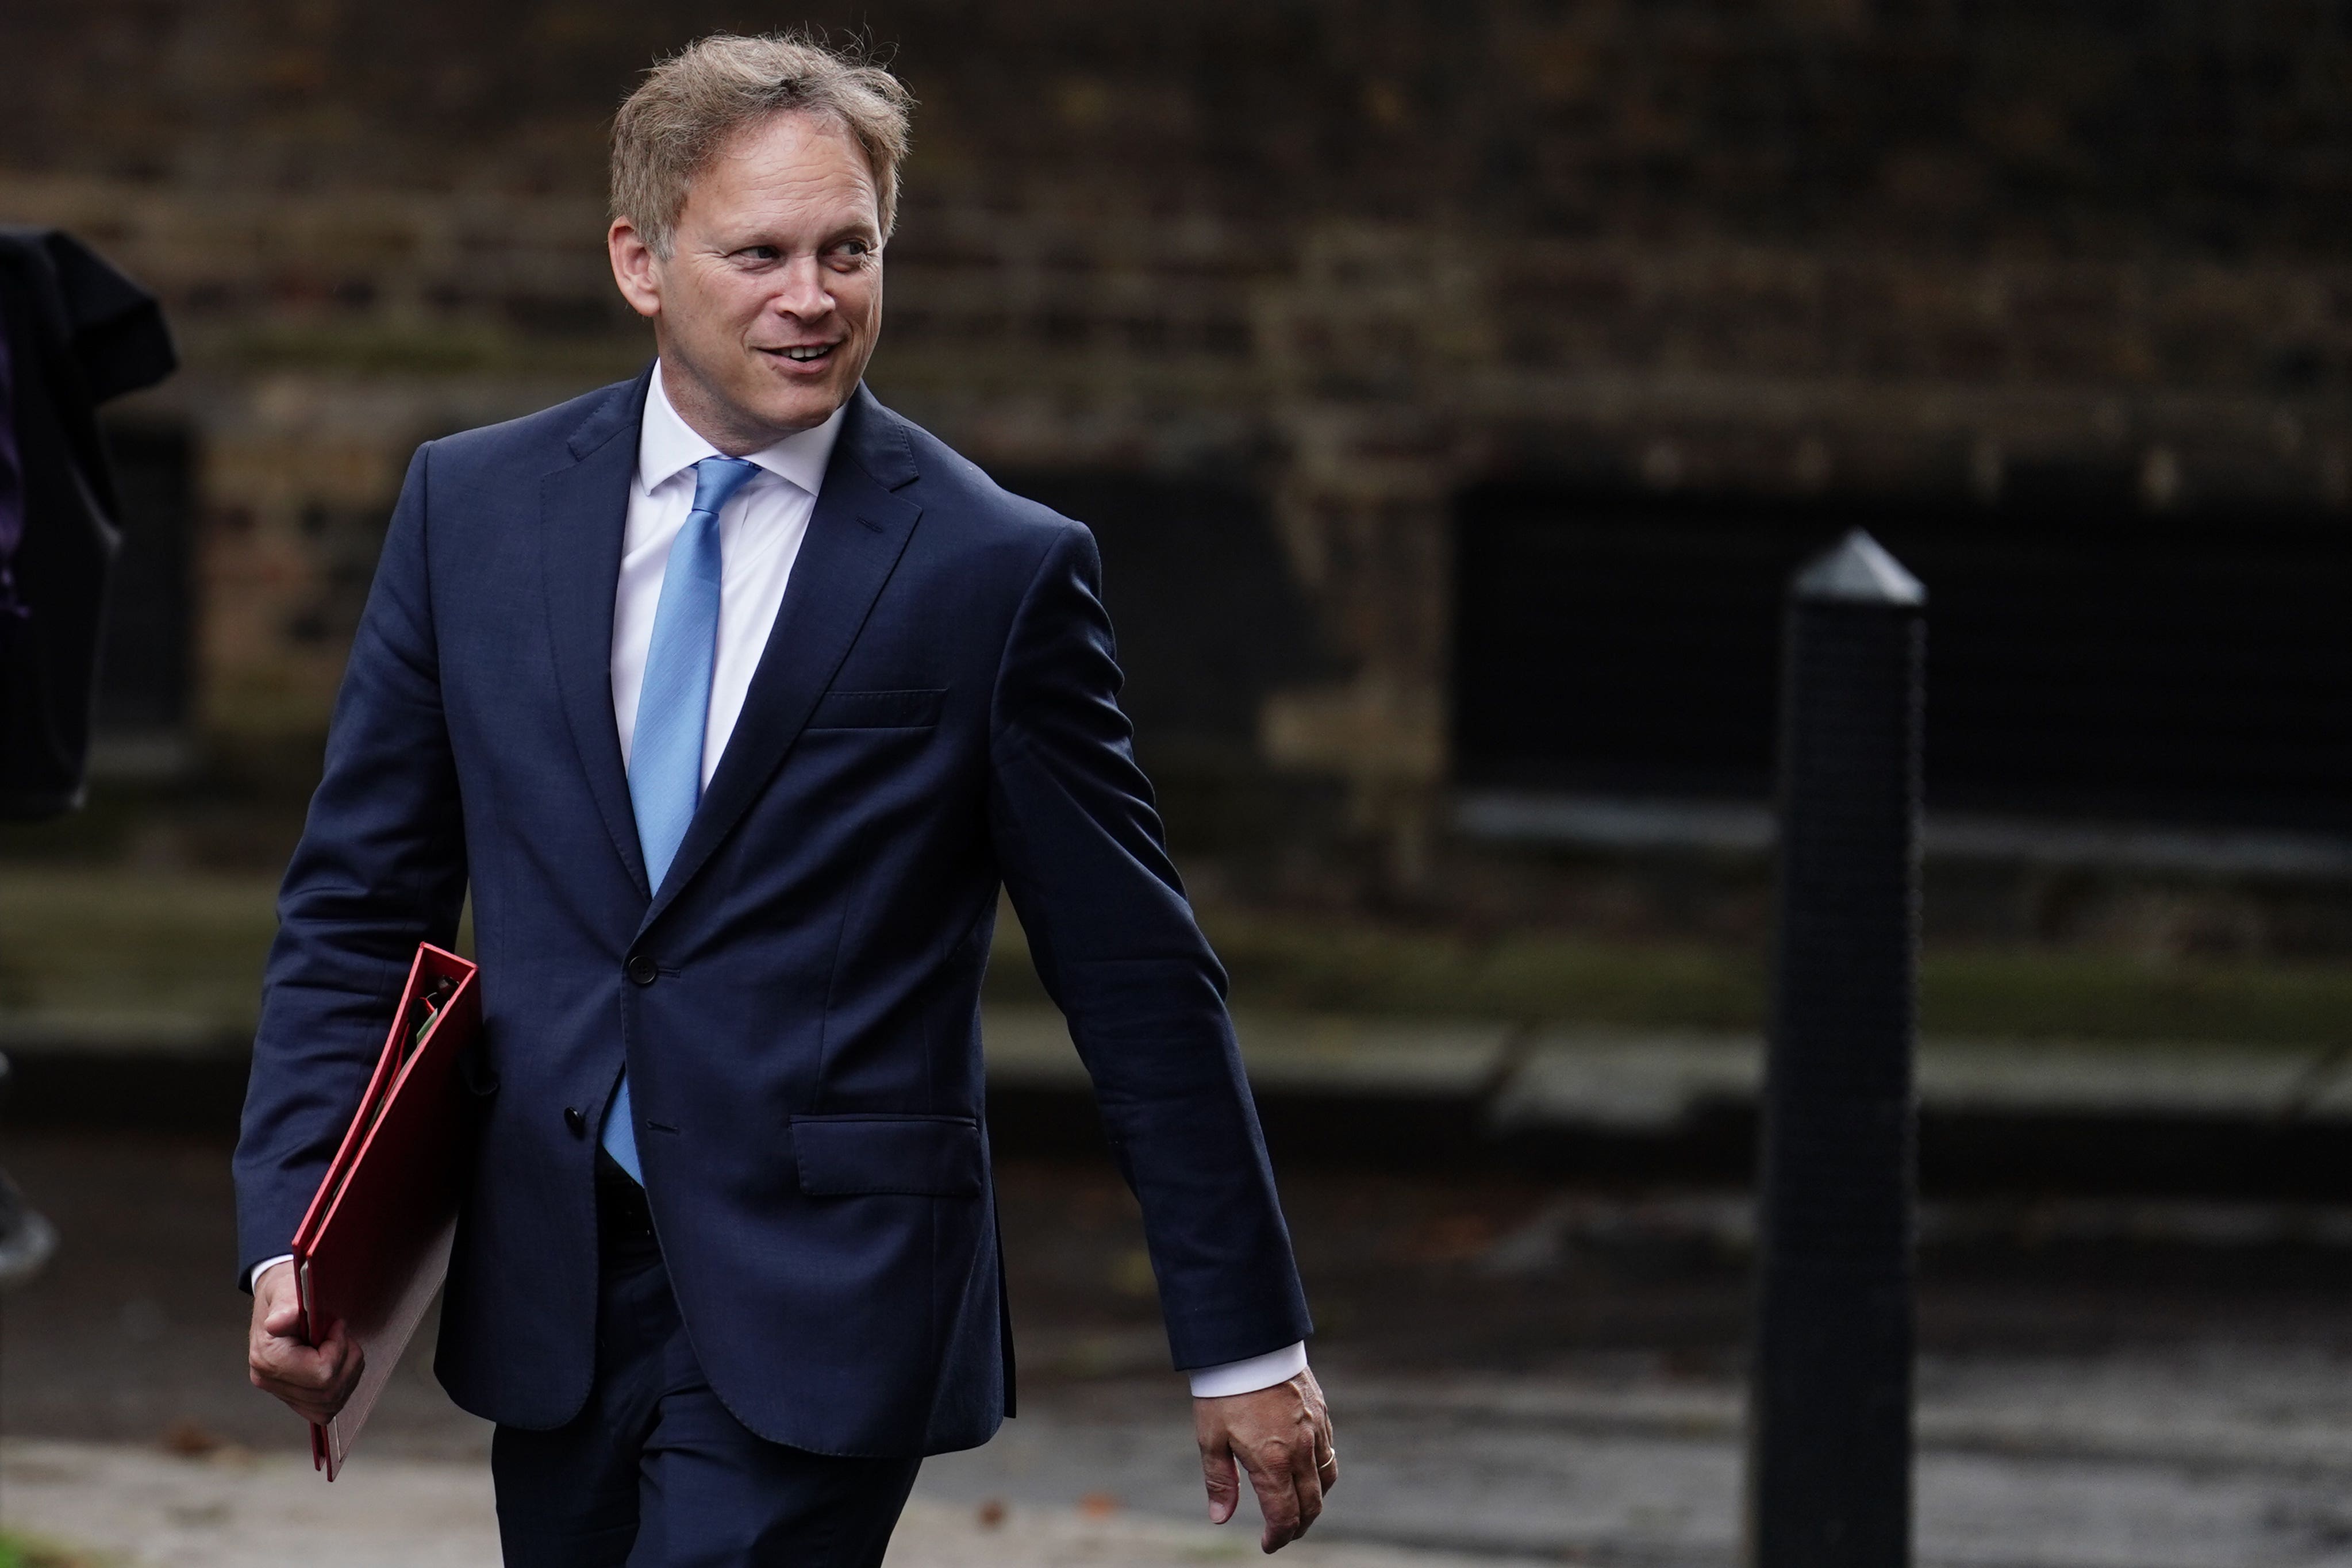 Grant Shapps said the UK’s commitment to protect lives in the Red Sea is ‘unwavering’ (Jordan Pettitt/PA)